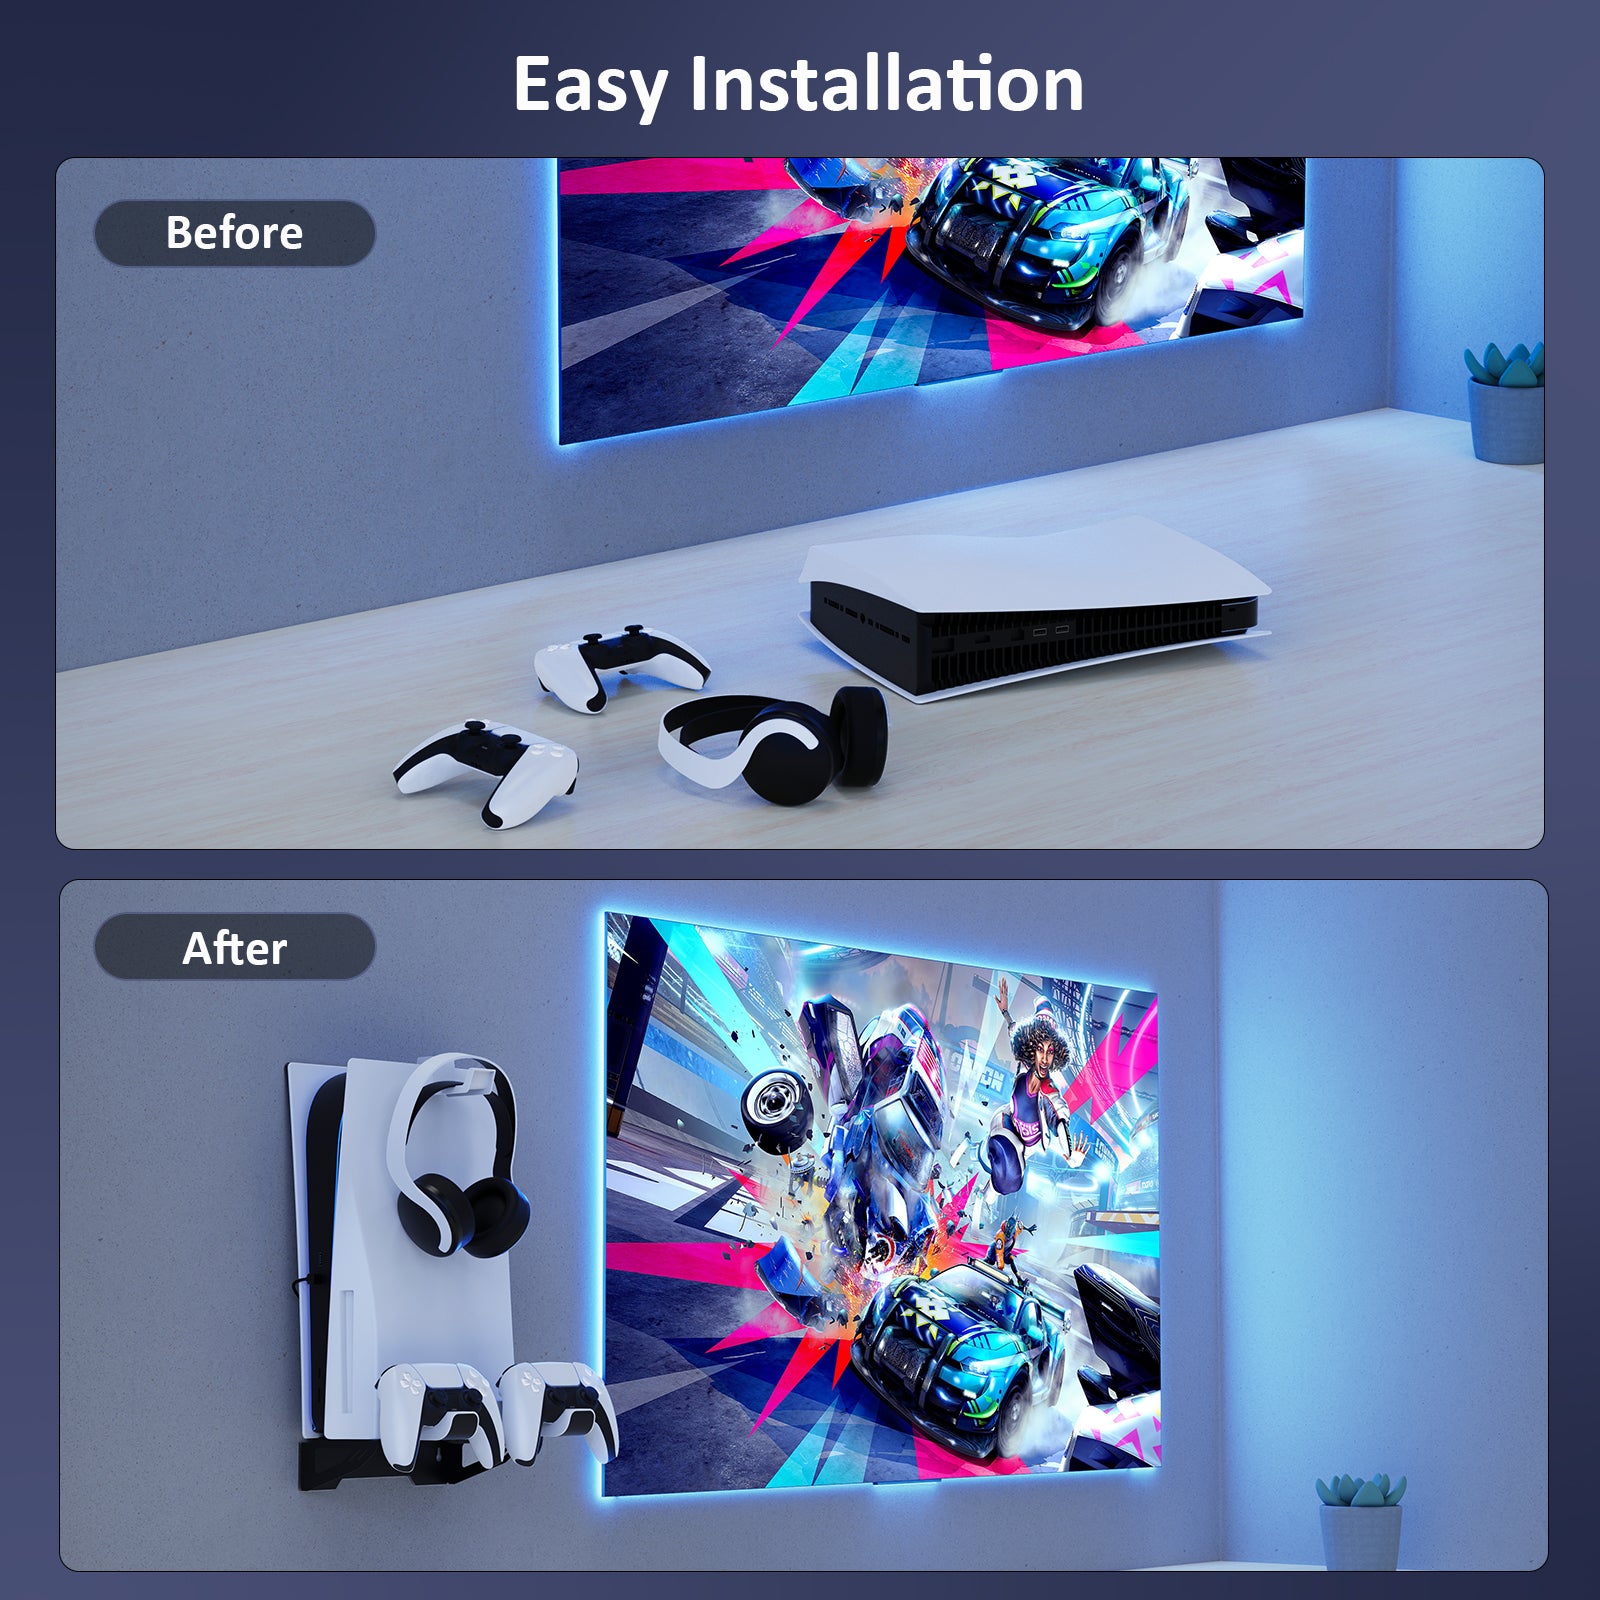 With the Wall Mount Kit, you can save space and keep things tidy compared to not using it.